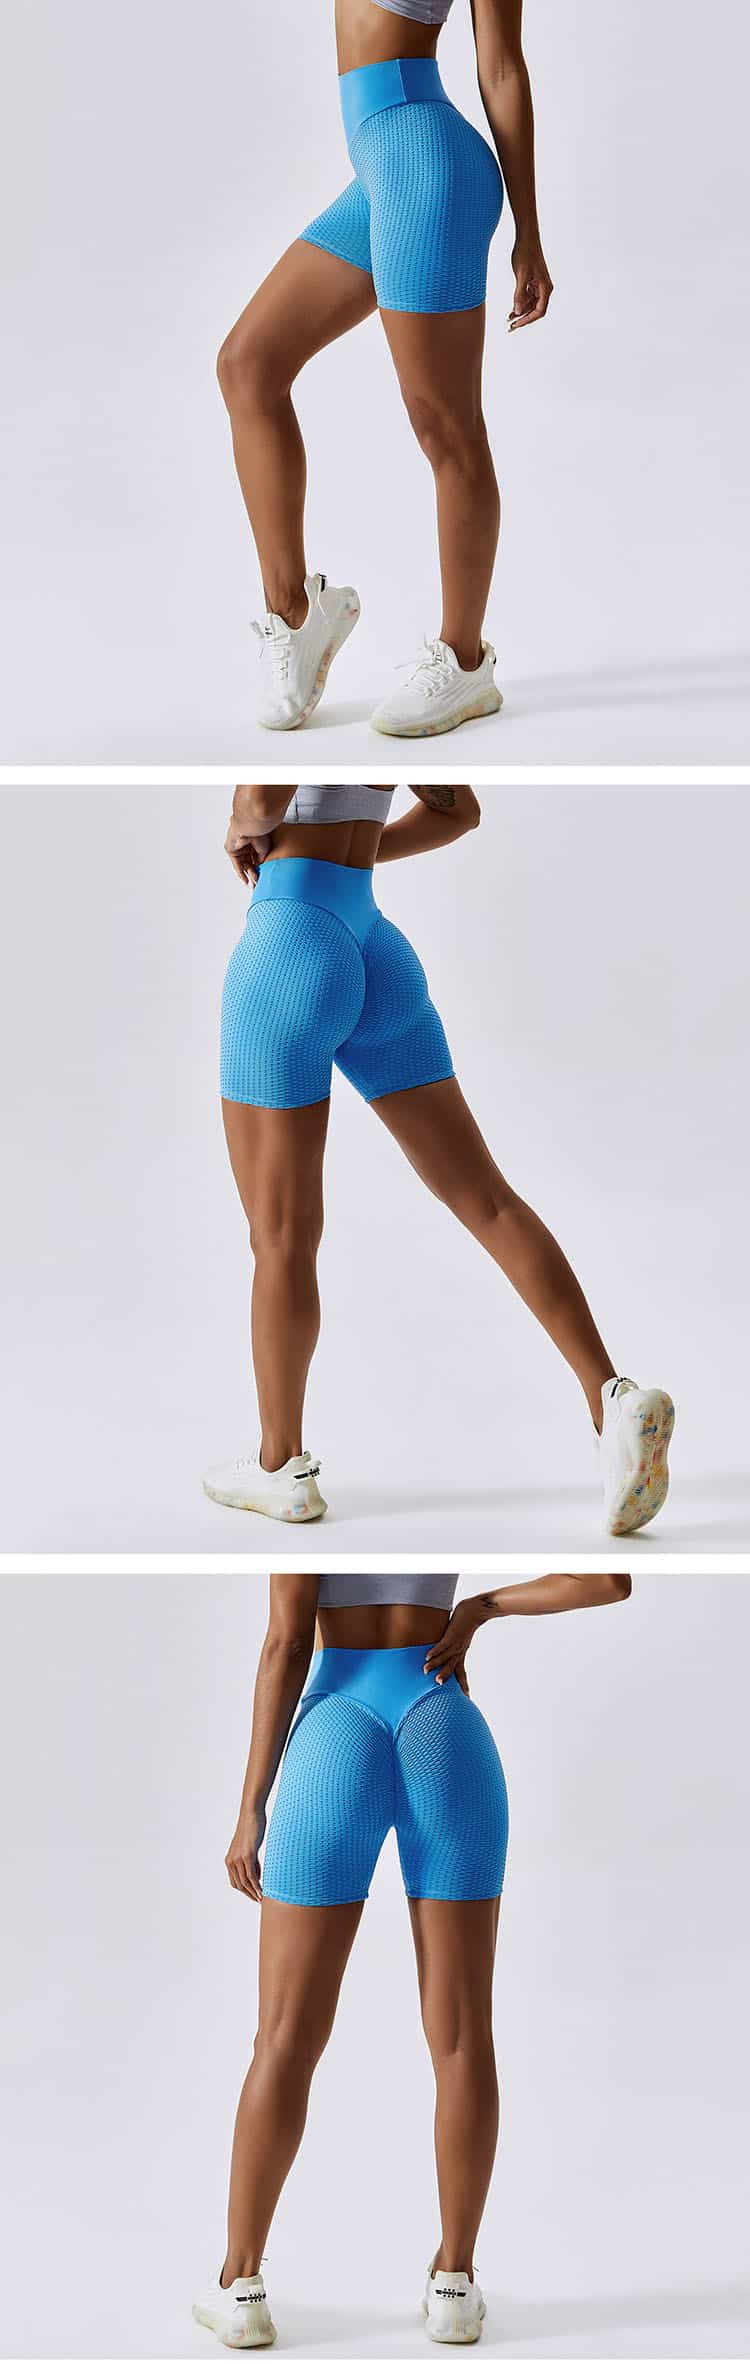 High waist design is adopted to cover the abdominal fat and show the waist curve